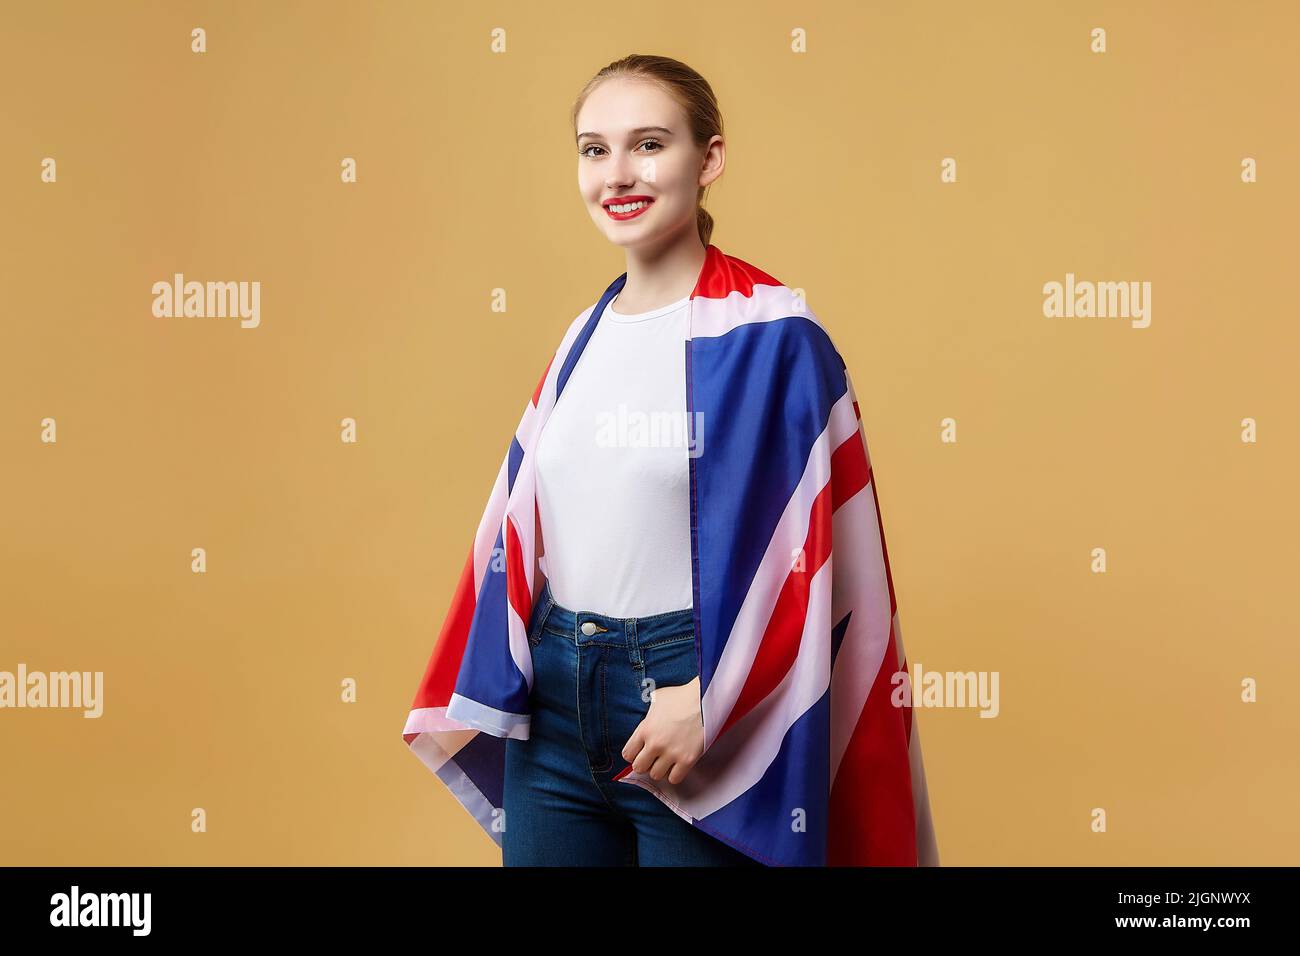 attractive blonde poses with a British flag. photo shoot in the studio on a yellow background. Stock Photo